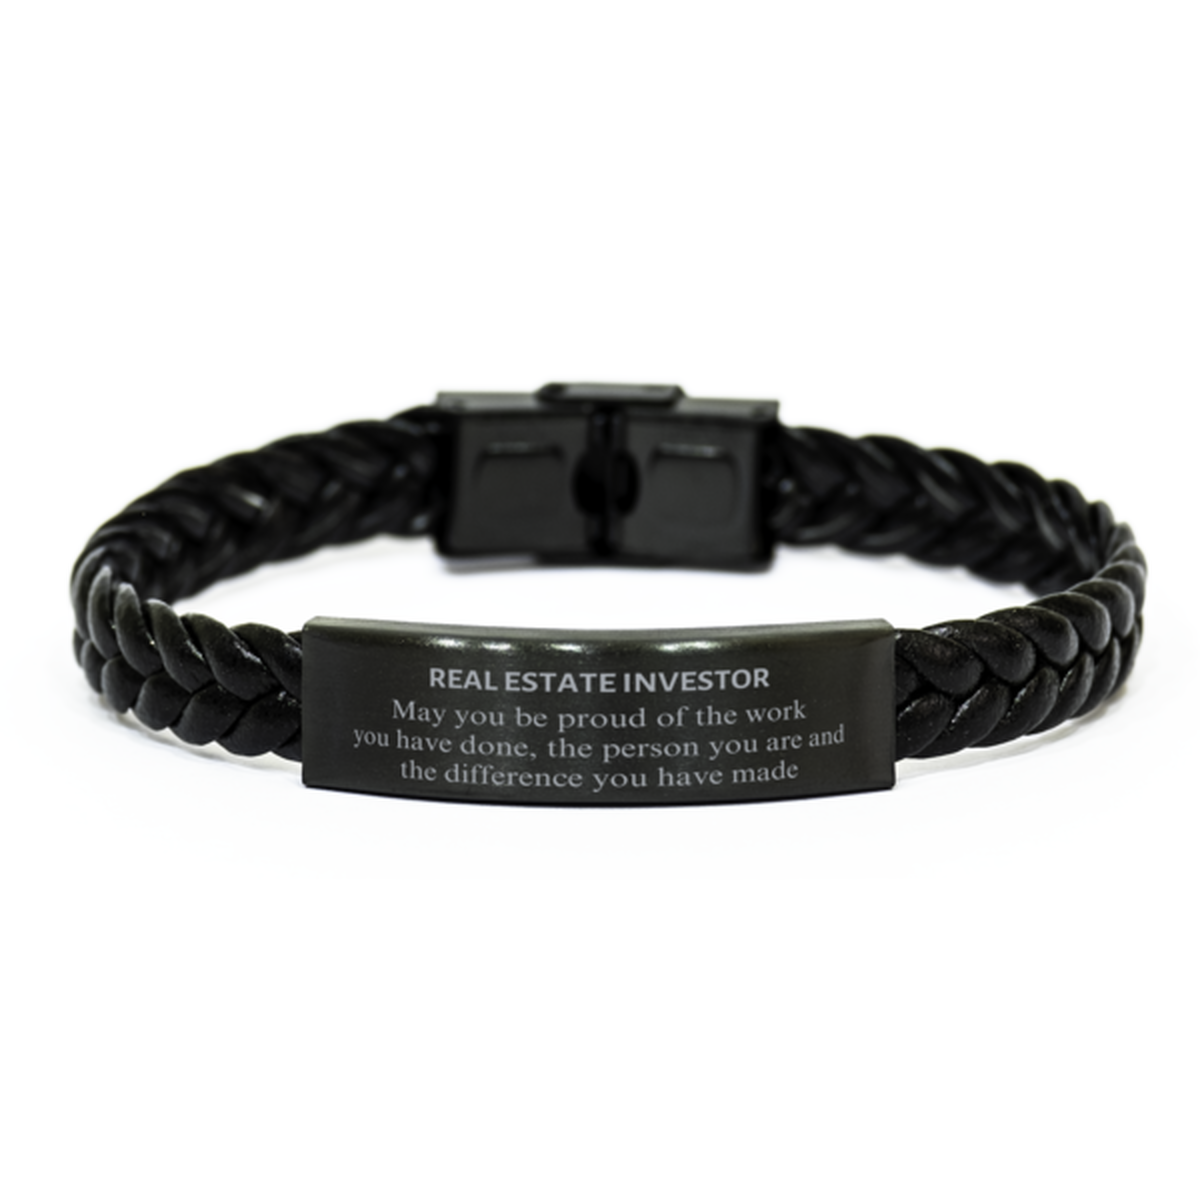 Real Estate Investor May you be proud of the work you have done, Retirement Real Estate Investor Braided Leather Bracelet for Colleague Appreciation Gifts Amazing for Real Estate Investor